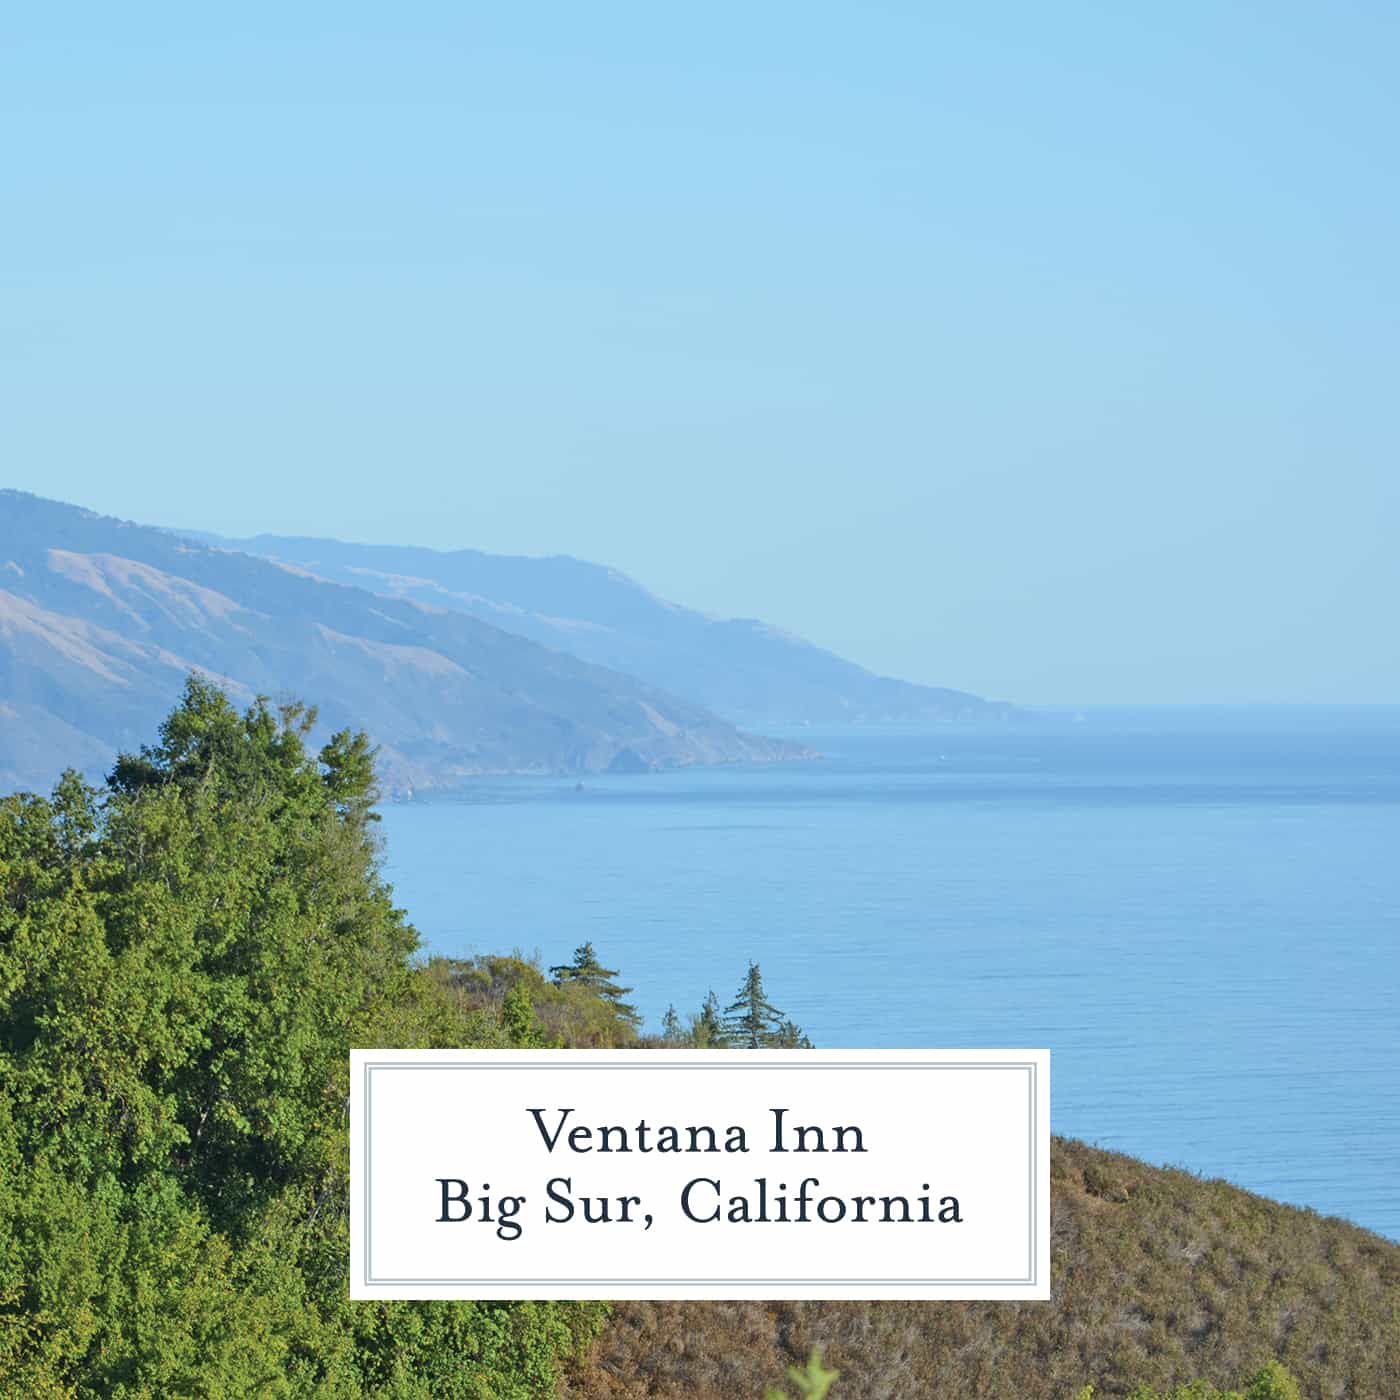 One magical night at the Ventana Inn at Big Sur left a huge impact. Learn more about their culinary program, wine tastings, spa and unique accommodations. #bigsur #ventanainn www.savoryexperiments.com 